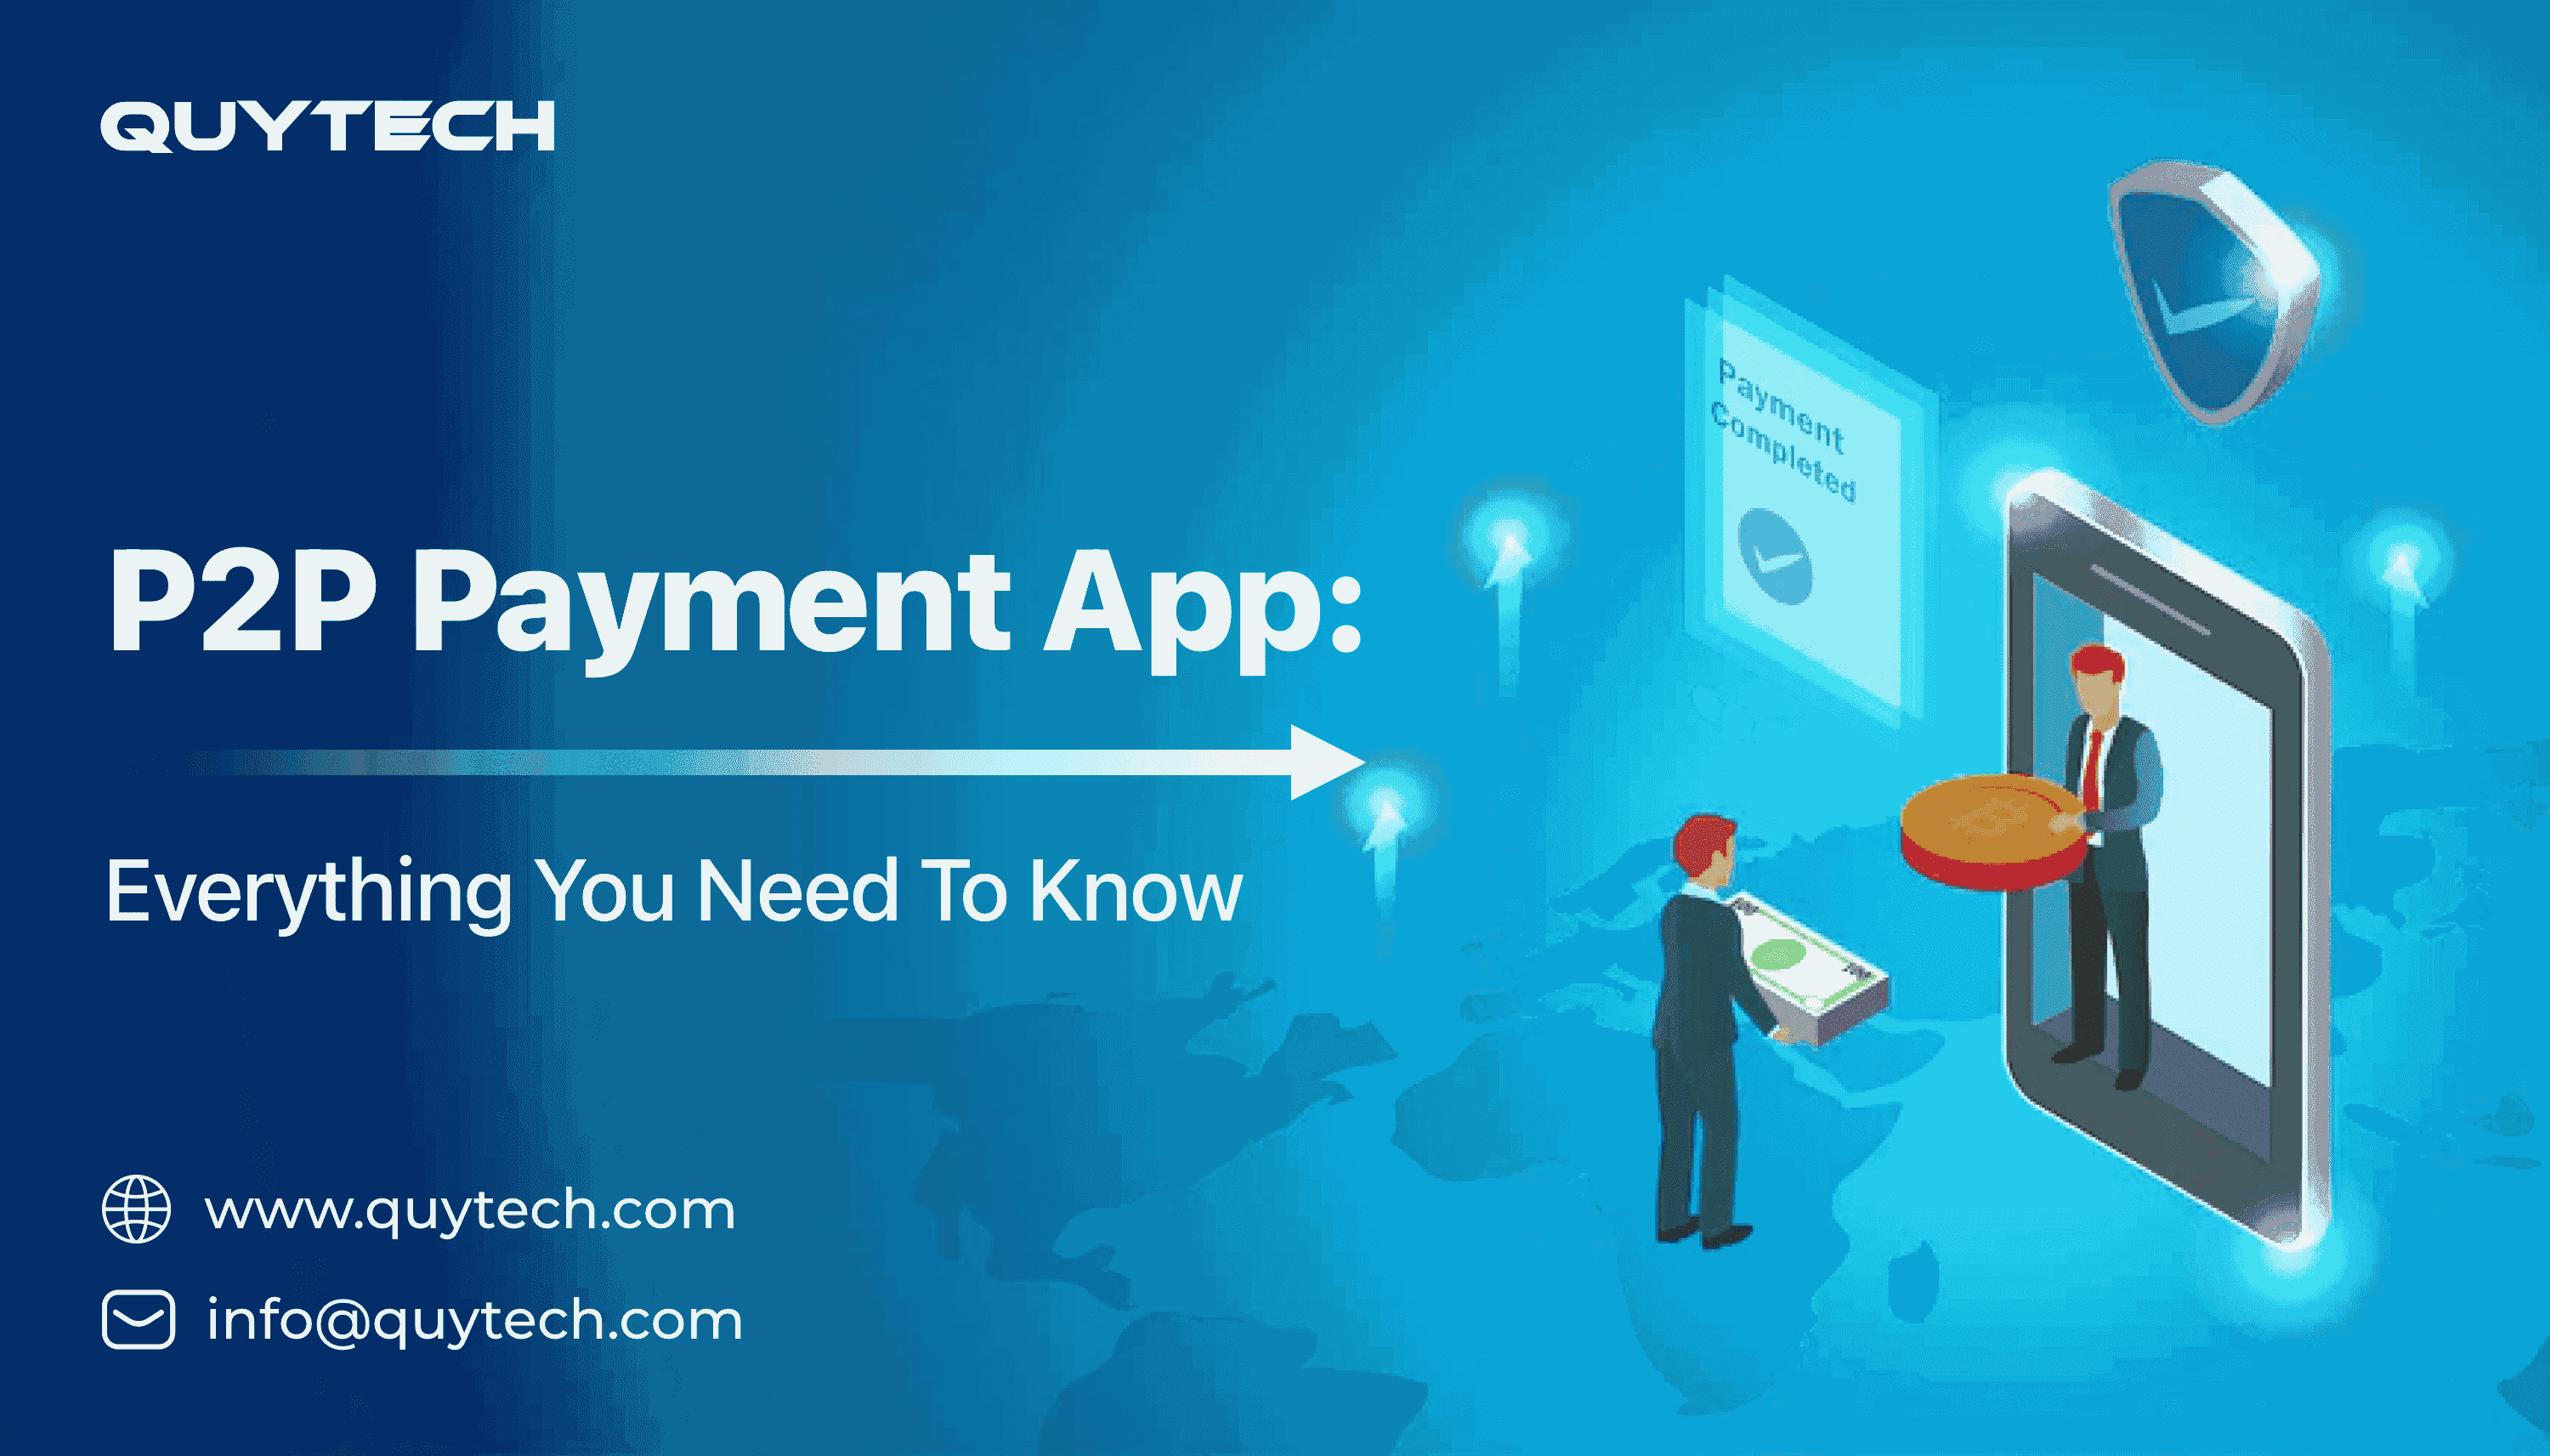 How To Develop A P2P Payment App Like Venmo & Zelle?